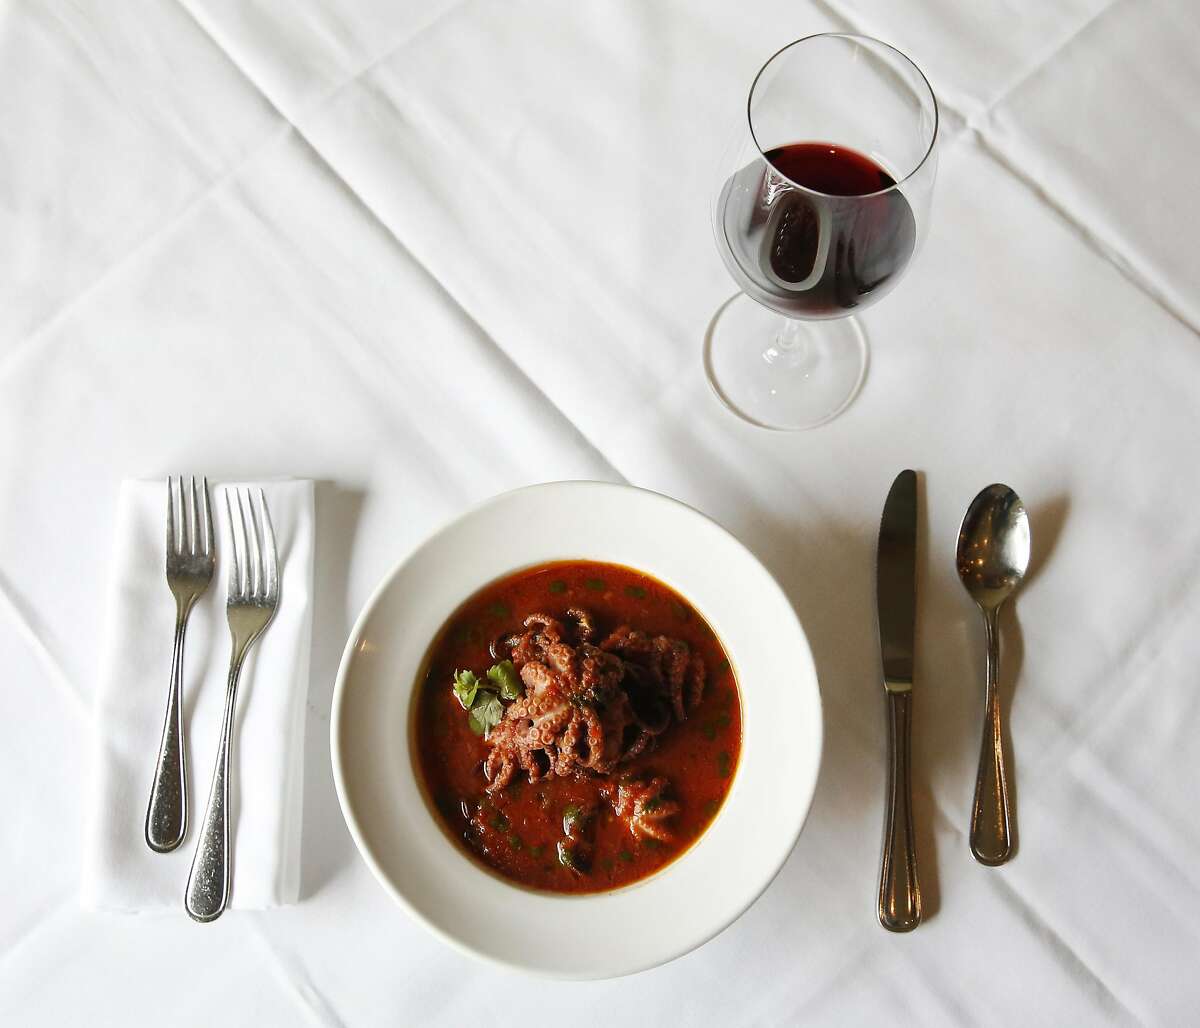 A glass of Is Solus, Carignano del Sulcis with Prupisceddu in Umidu cun Tomatiga (baby octopus stew in a spicy tomato sauce) pictured at La Ciccia May 26, 2017 in San Francisco, Calif.